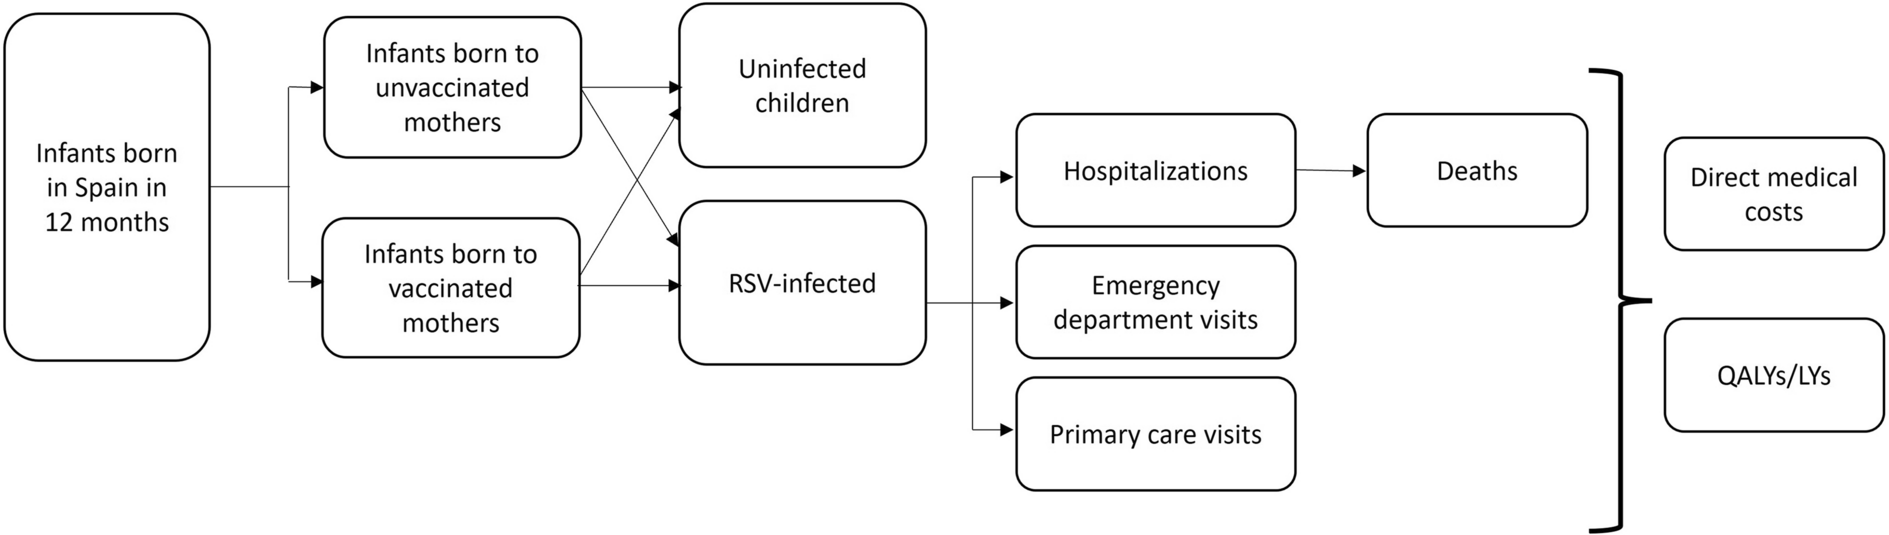 Cost-effectiveness Analysis of Maternal Immunization with RSVpreF Vaccine for the Prevention of Respiratory Syncytial Virus Among Infants in Spain